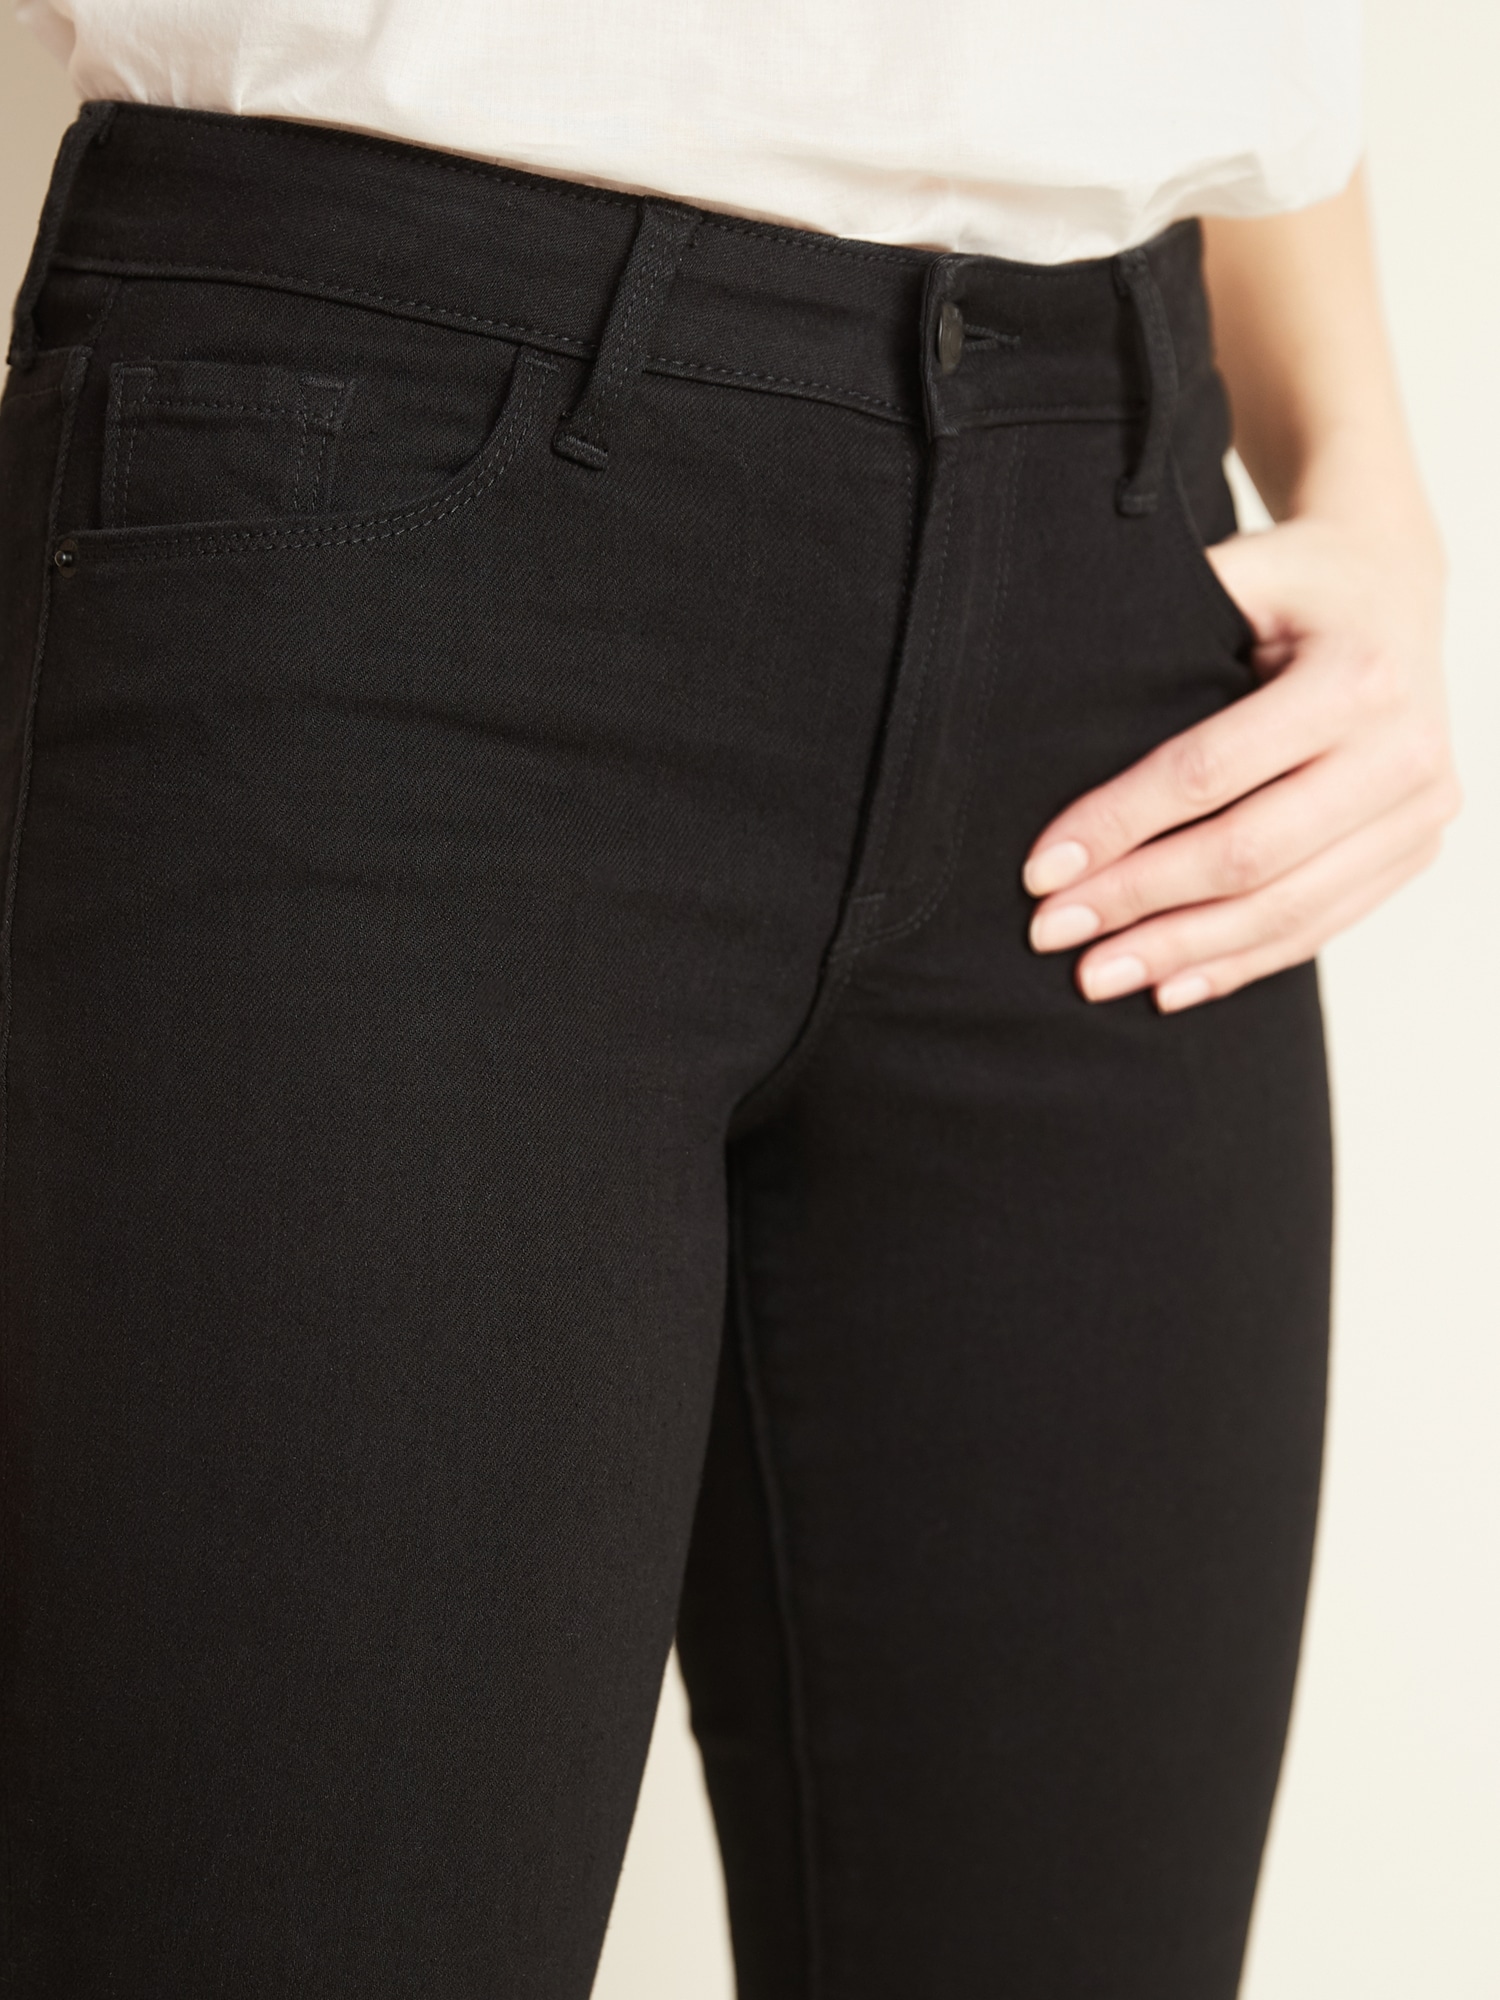 black jeans trousers